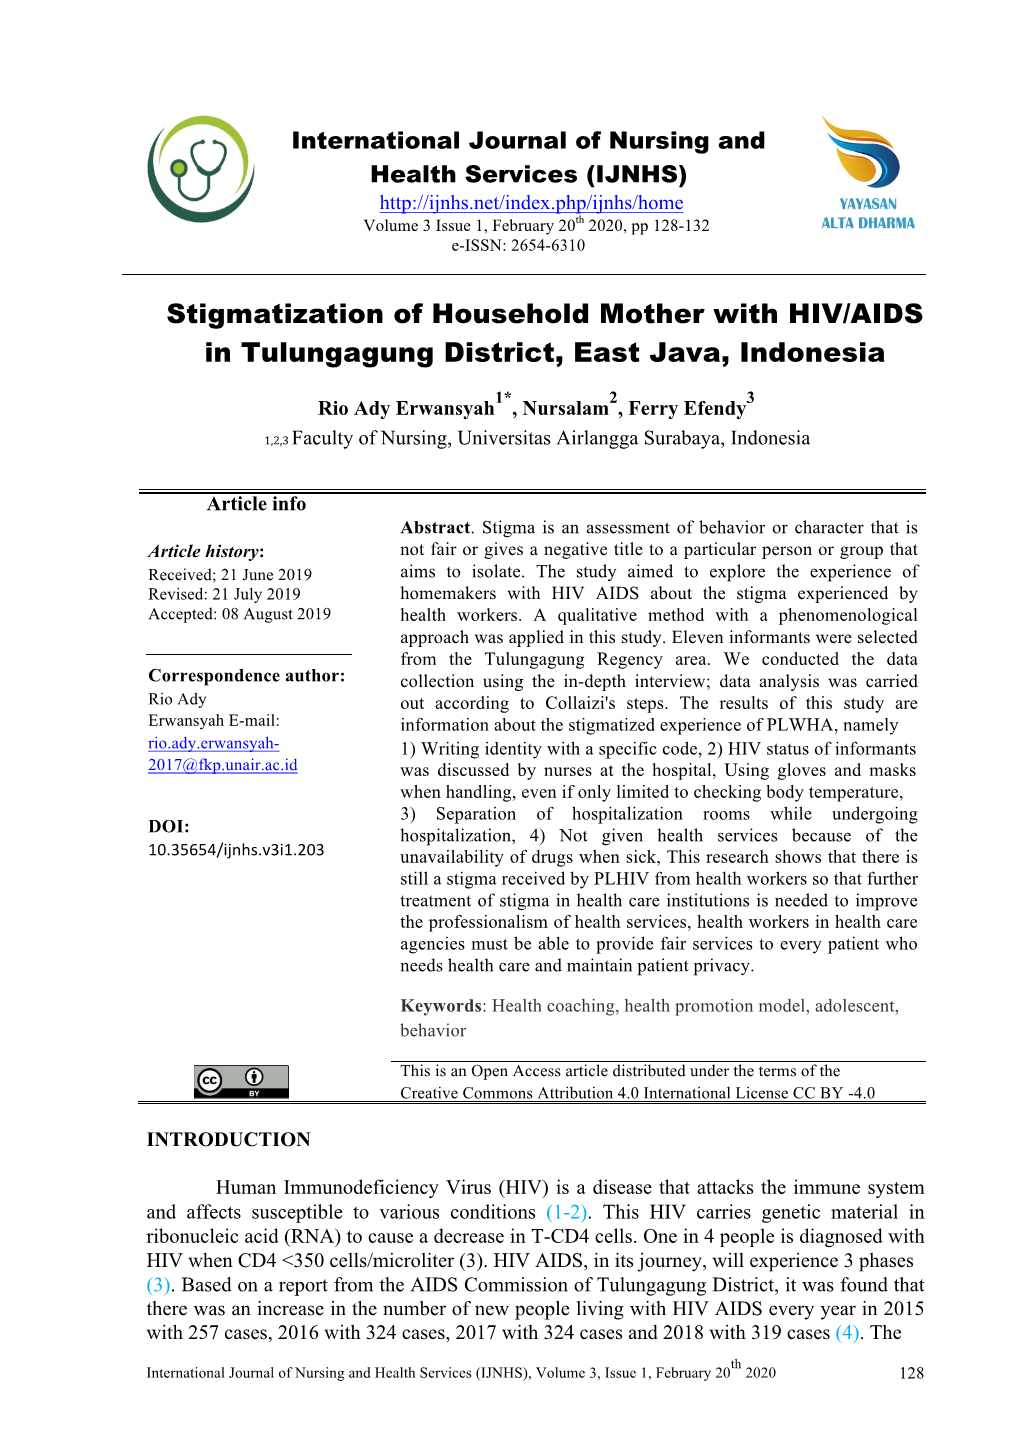 Stigmatization of Household Mother with HIV/AIDS in Tulungagung District, East Java, Indonesia